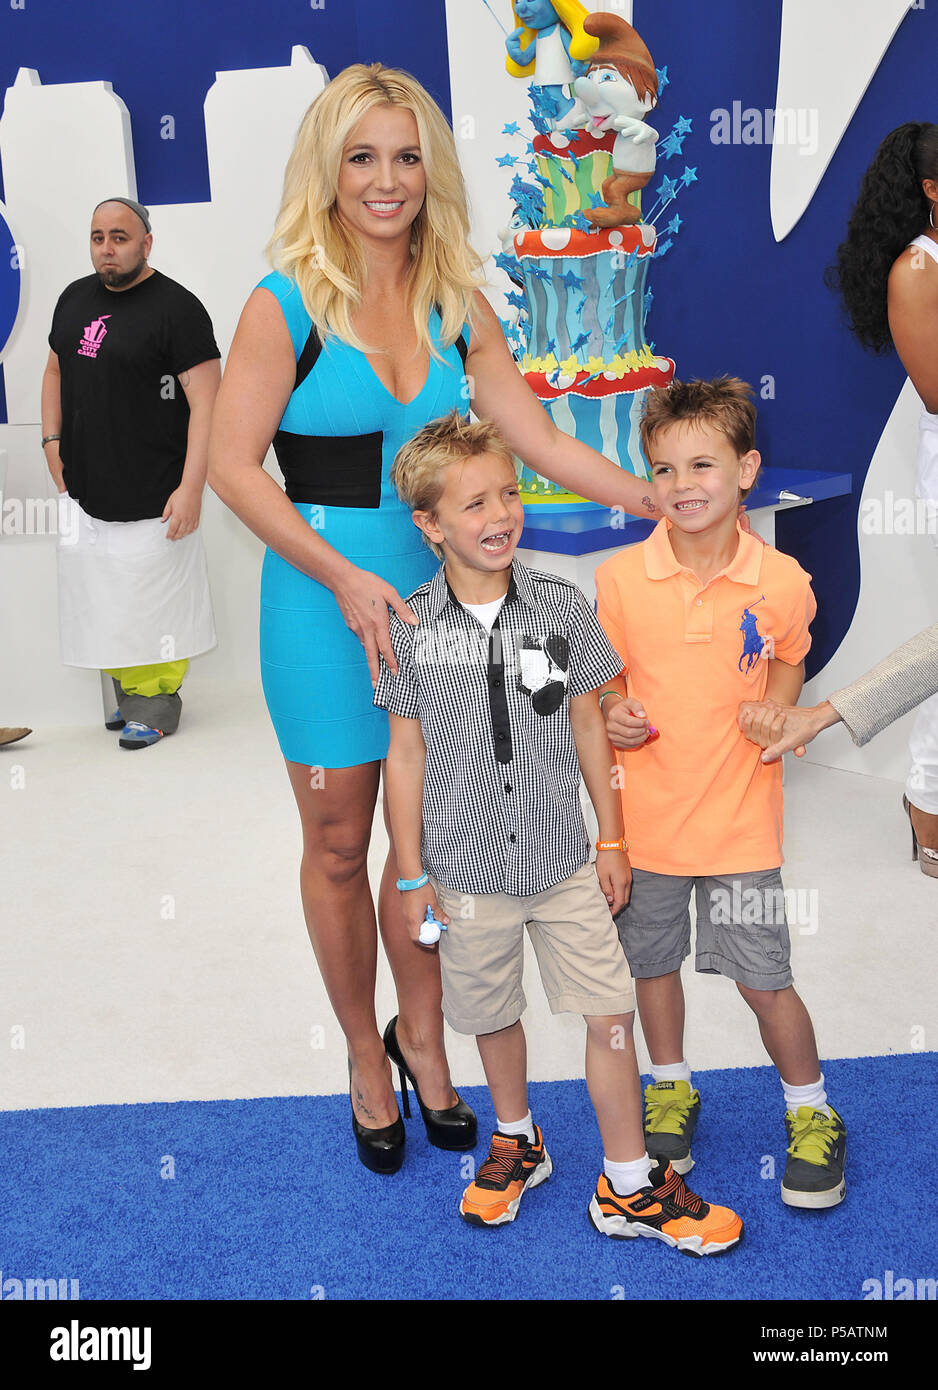 a Britney Spears, Jayden James Federline, Sean Federline  at the Smurfs 2 Premiere at the Westwood Village Theatre in Los Angeles.a Britney Spears, Jayden James Federline, Sean Federline 126 ------------- Red Carpet Event, Vertical, USA, Film Industry, Celebrities,  Photography, Bestof, Arts Culture and Entertainment, Topix Celebrities fashion /  Vertical, Best of, Event in Hollywood Life - California,  Red Carpet and backstage, USA, Film Industry, Celebrities,  movie celebrities, TV celebrities, Music celebrities, Photography, Bestof, Arts Culture and Entertainment,  Topix, vertical,  family  Stock Photo